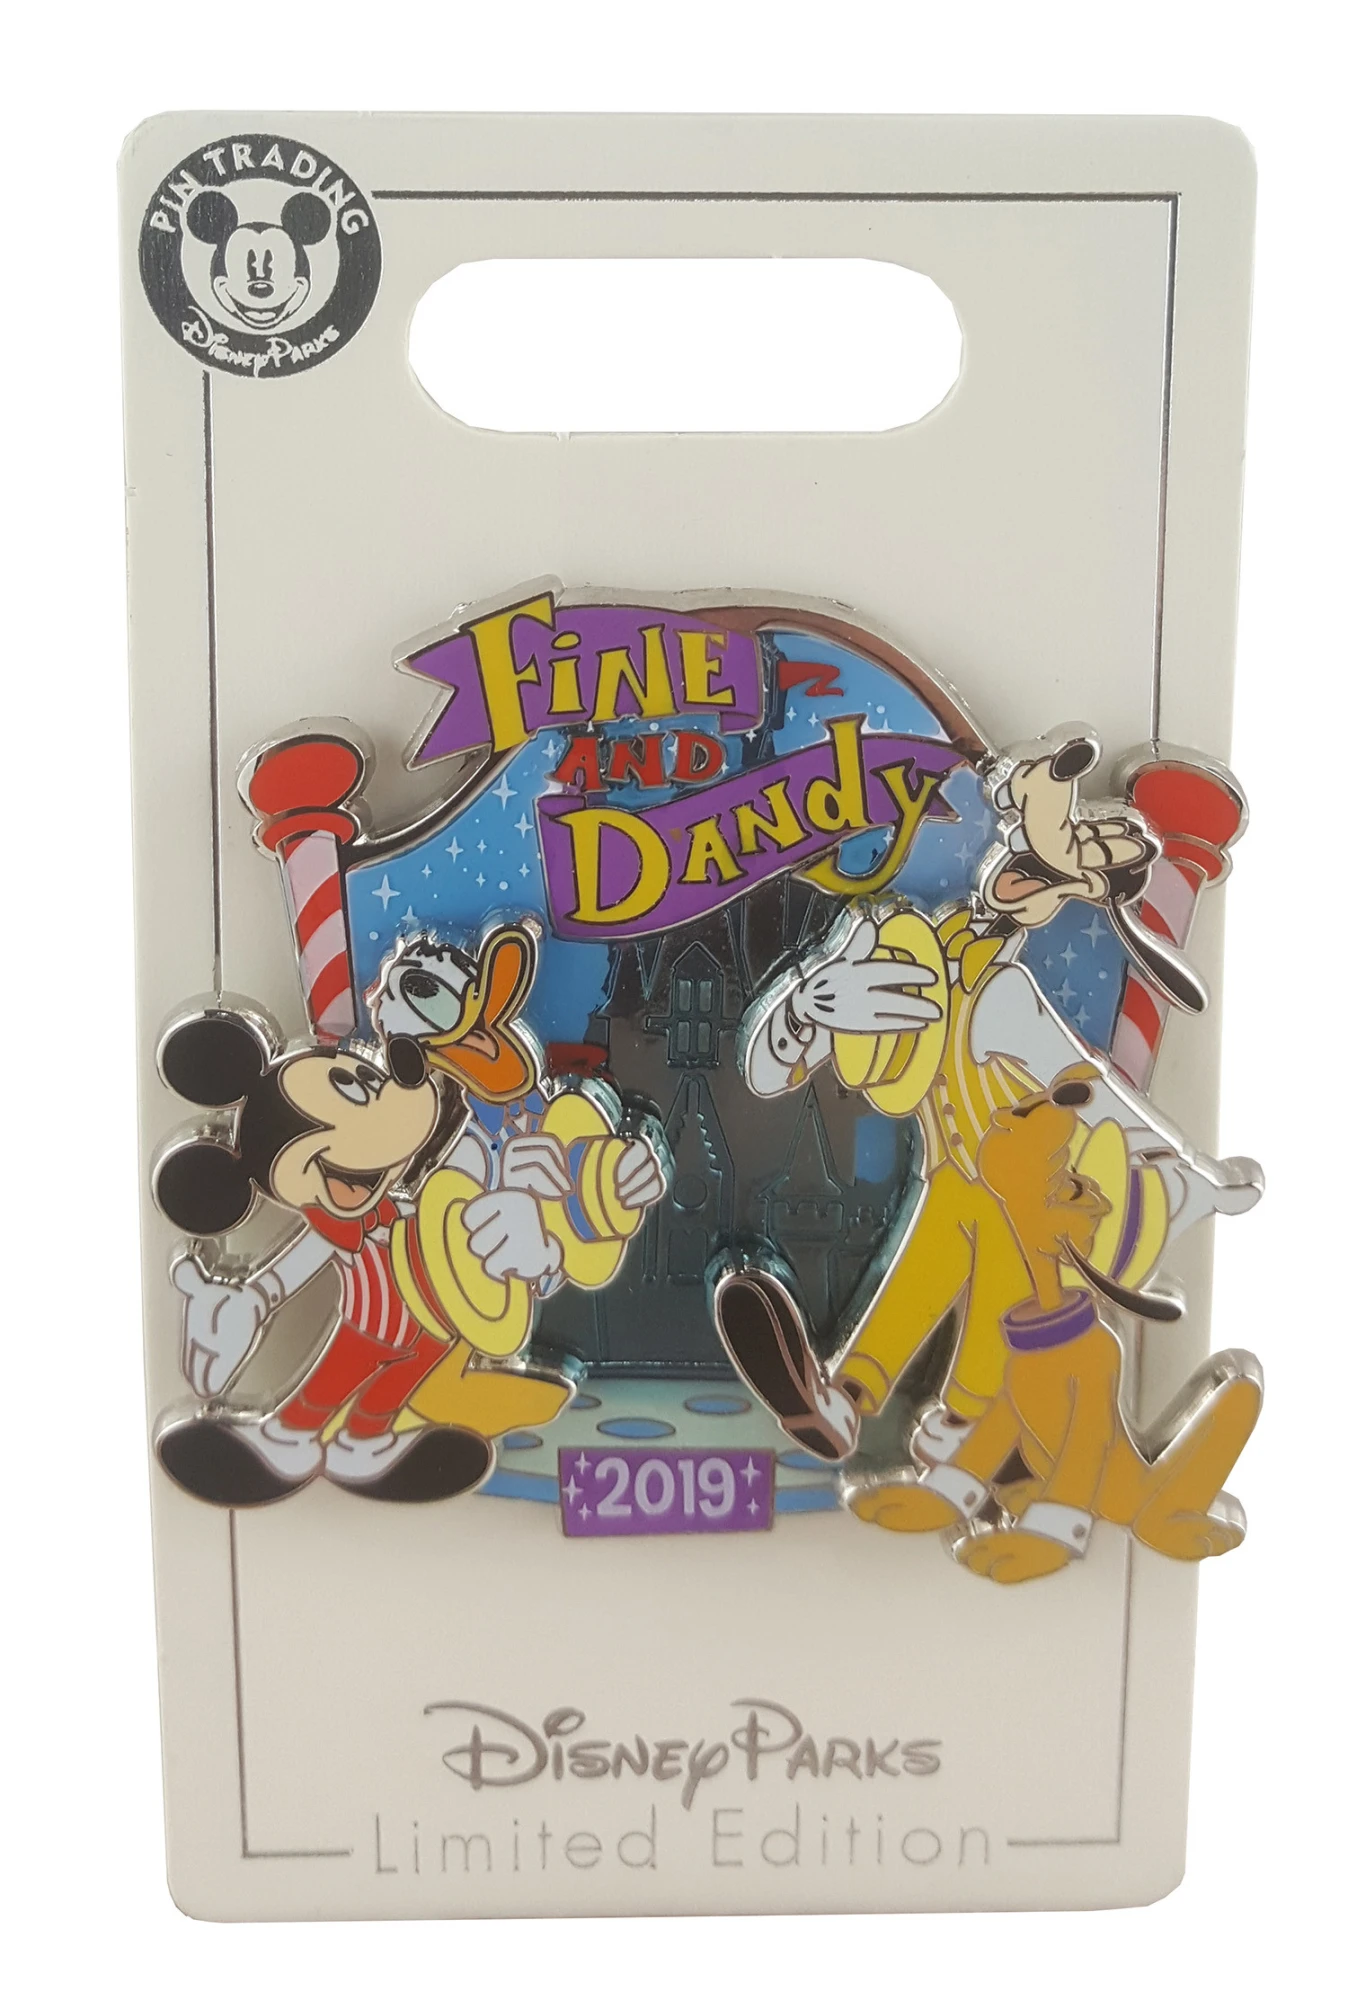 item Disney Pin - Disney - Fall 2019 - Fine and Dandy Day - Mickey Mouse and Pluto 139376 4